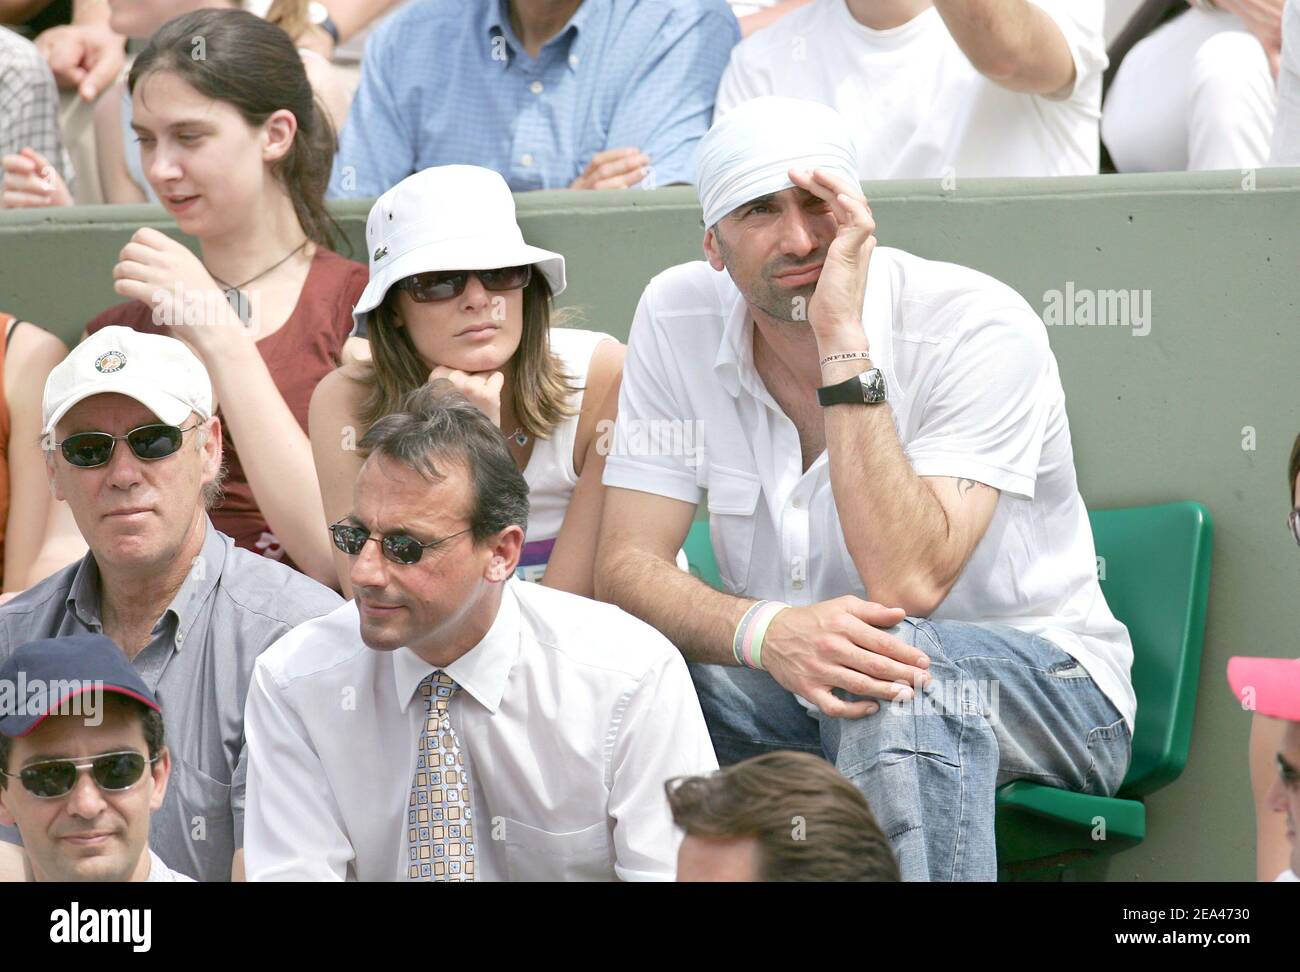 French soccer player (PSG) Jerome Alonzo and a female friend attend the match between French players Amelie Mauresmo and Alize Cornet in the second round of the French Open at the Roland Garros stadium in Paris, France, on May 26, 2005. Photo by Gorassini-Zabulon/ABACA. Stock Photo